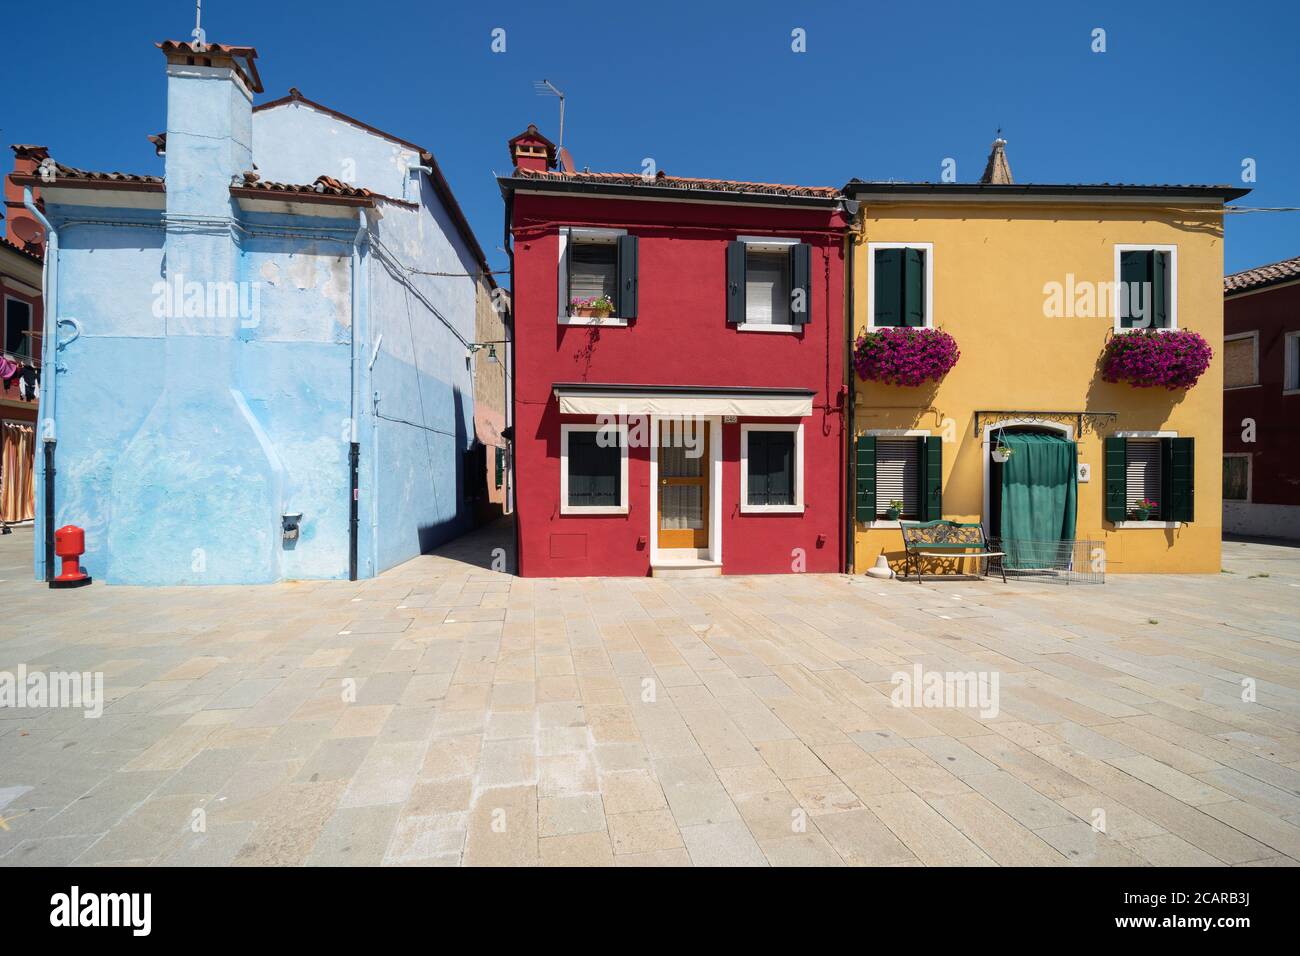 Burano island, Venetian Lagoon, Venice, Italy, panorama with the typical coloured fisherman homes of the town centre Stock Photo